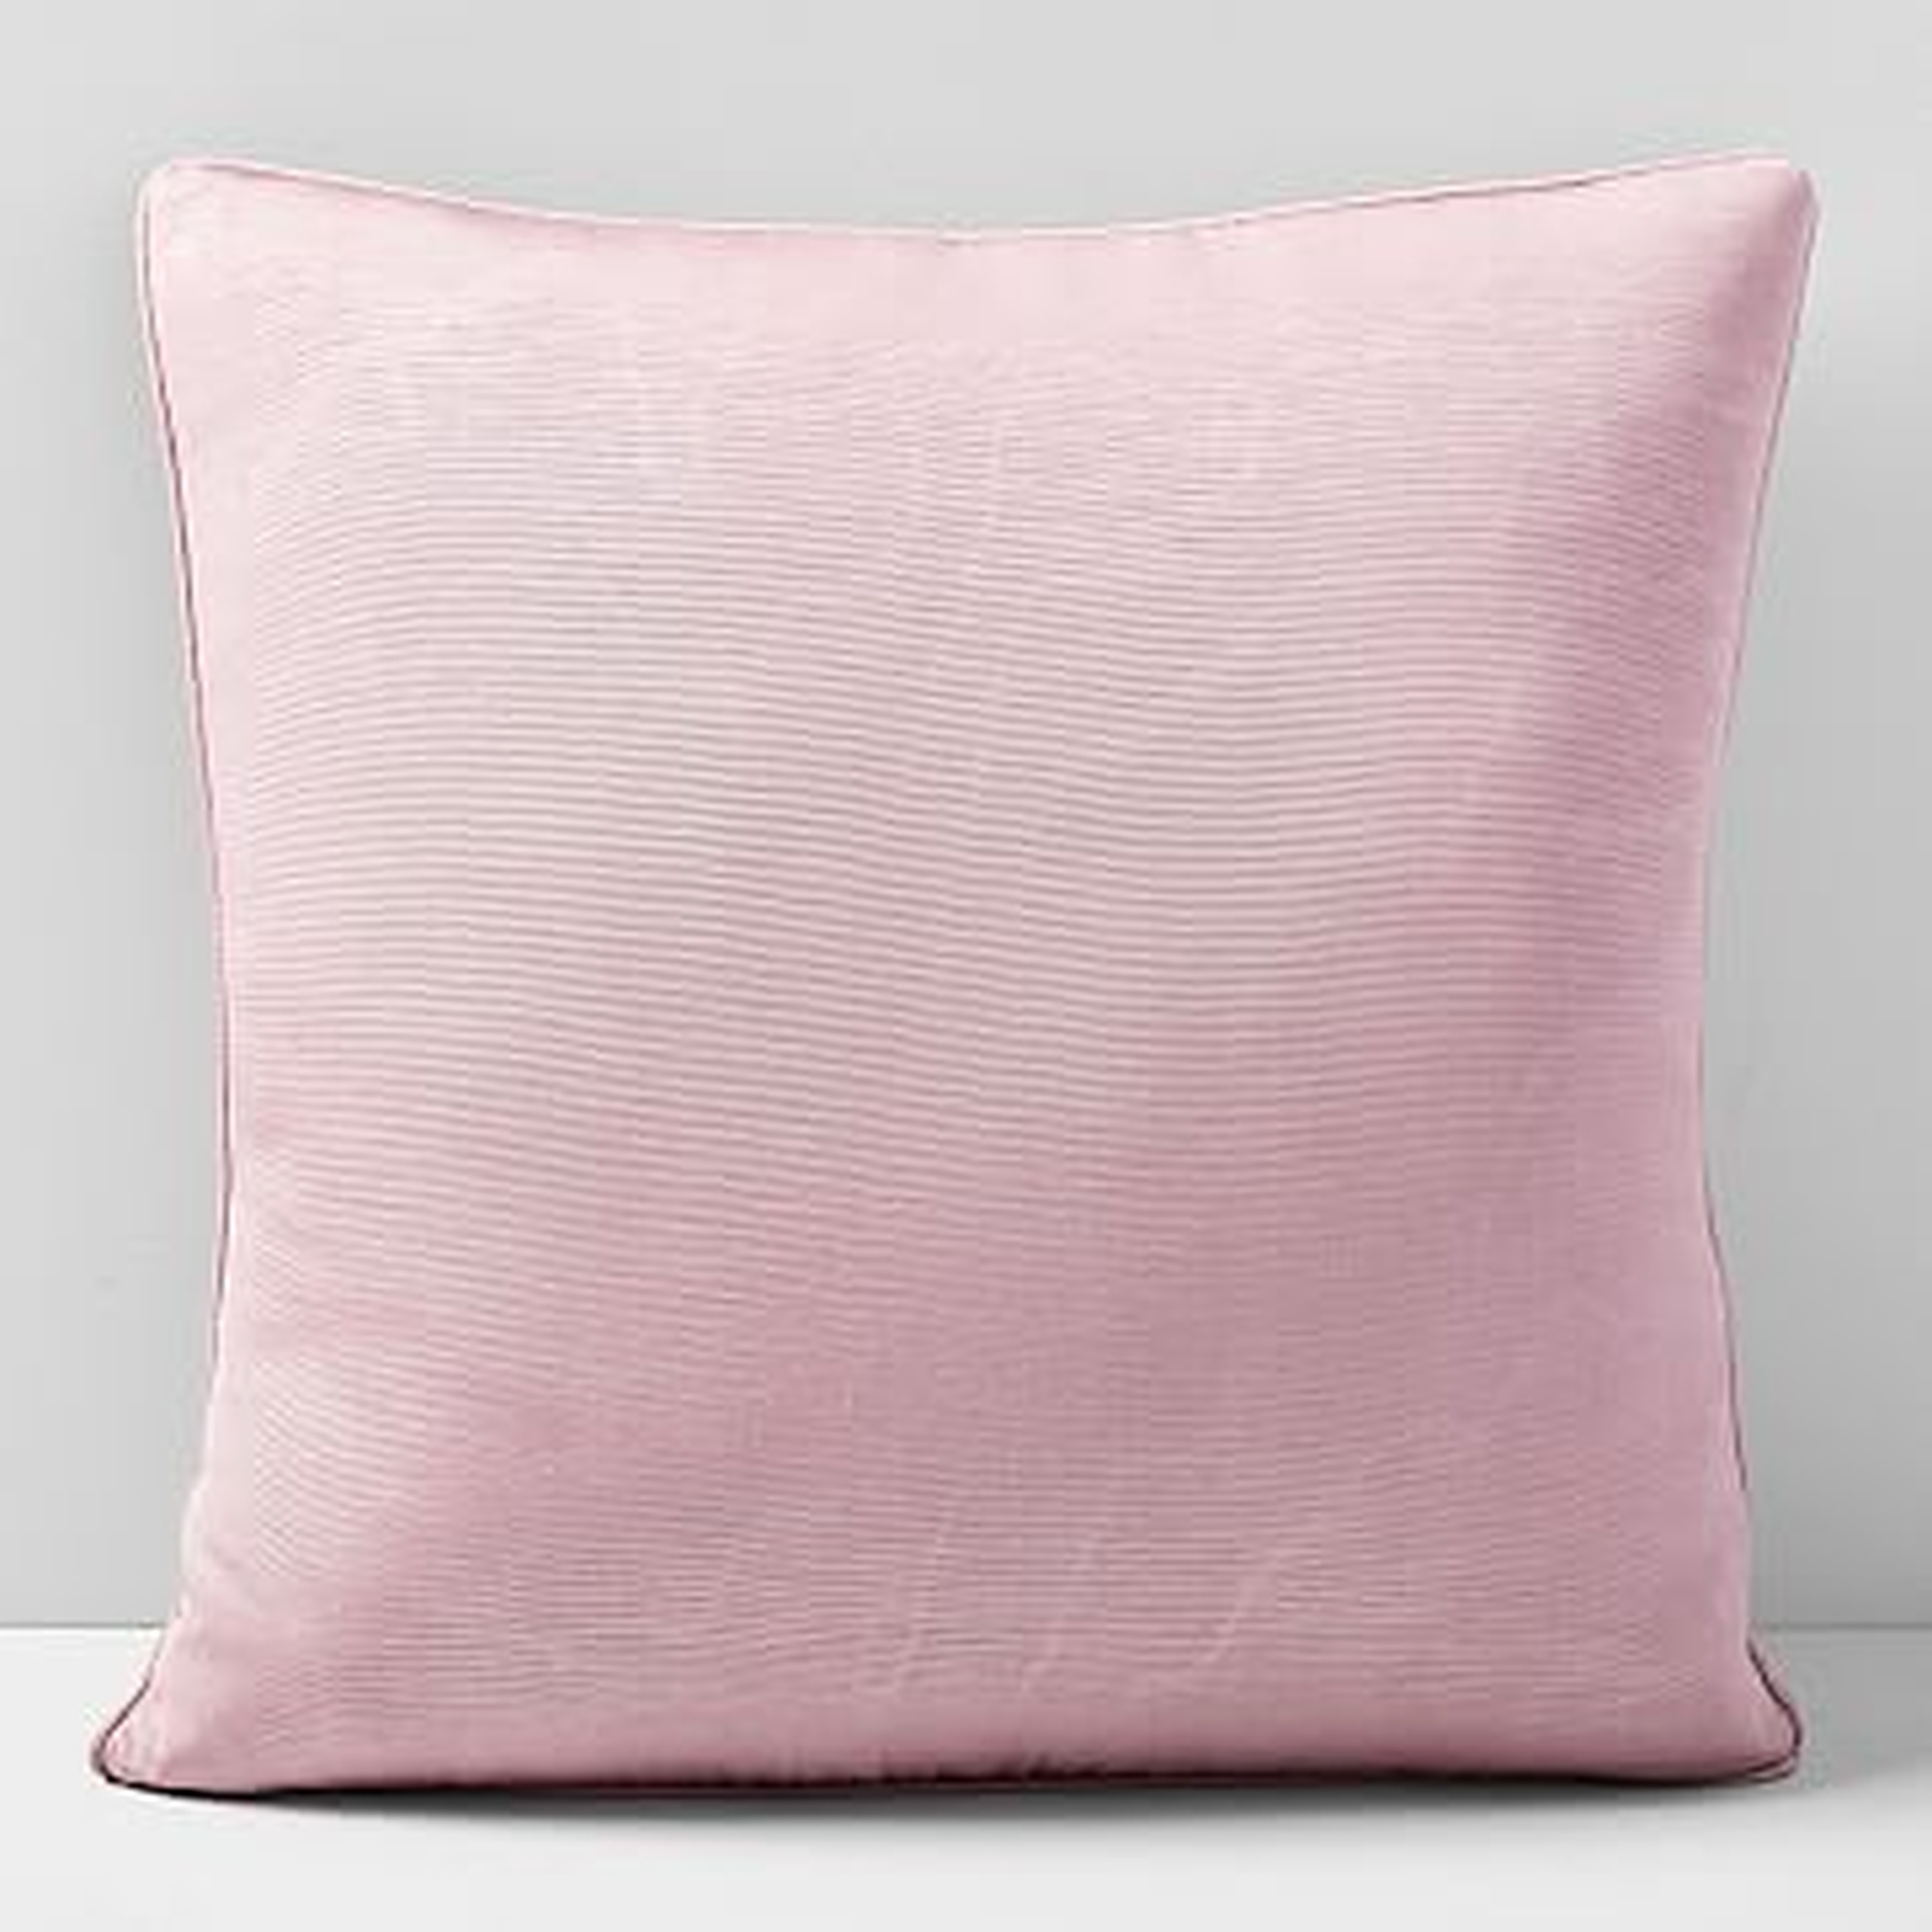 Faux Silk Moire Pillow Cover, 18"x18", Pink Stone - West Elm